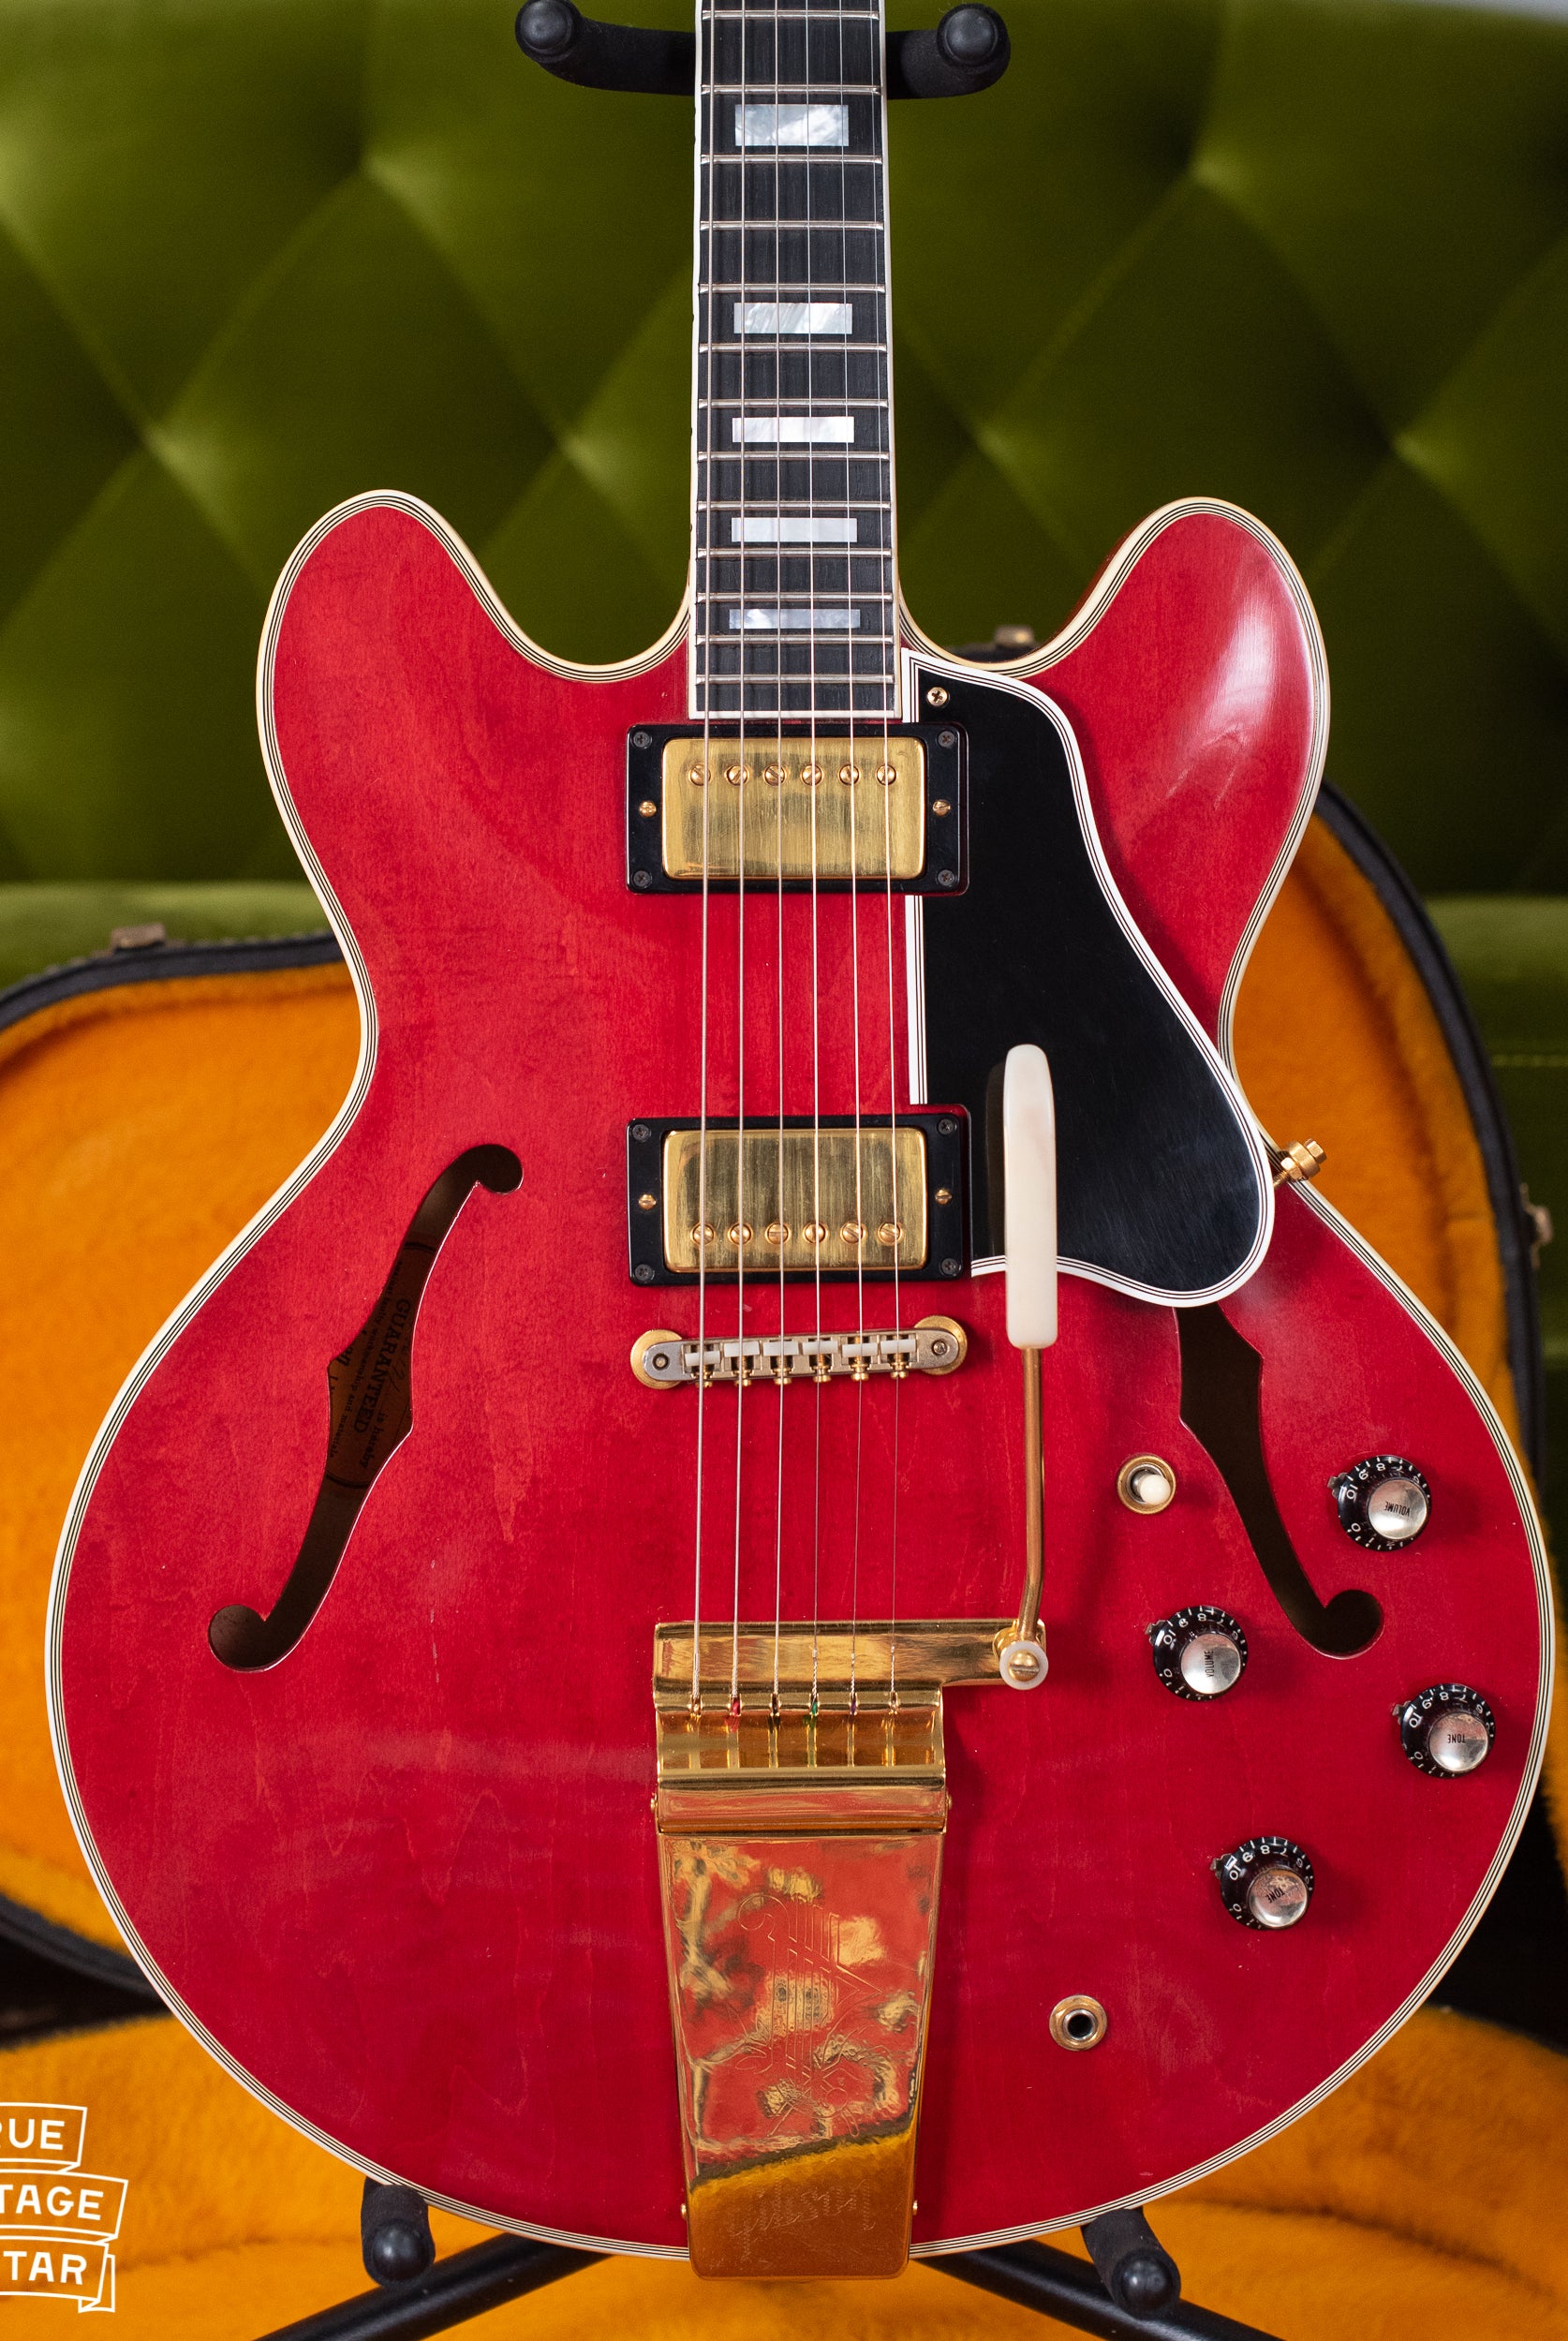 Gibson ES-355 1965, mono, red vintage guitar with gold hardware.